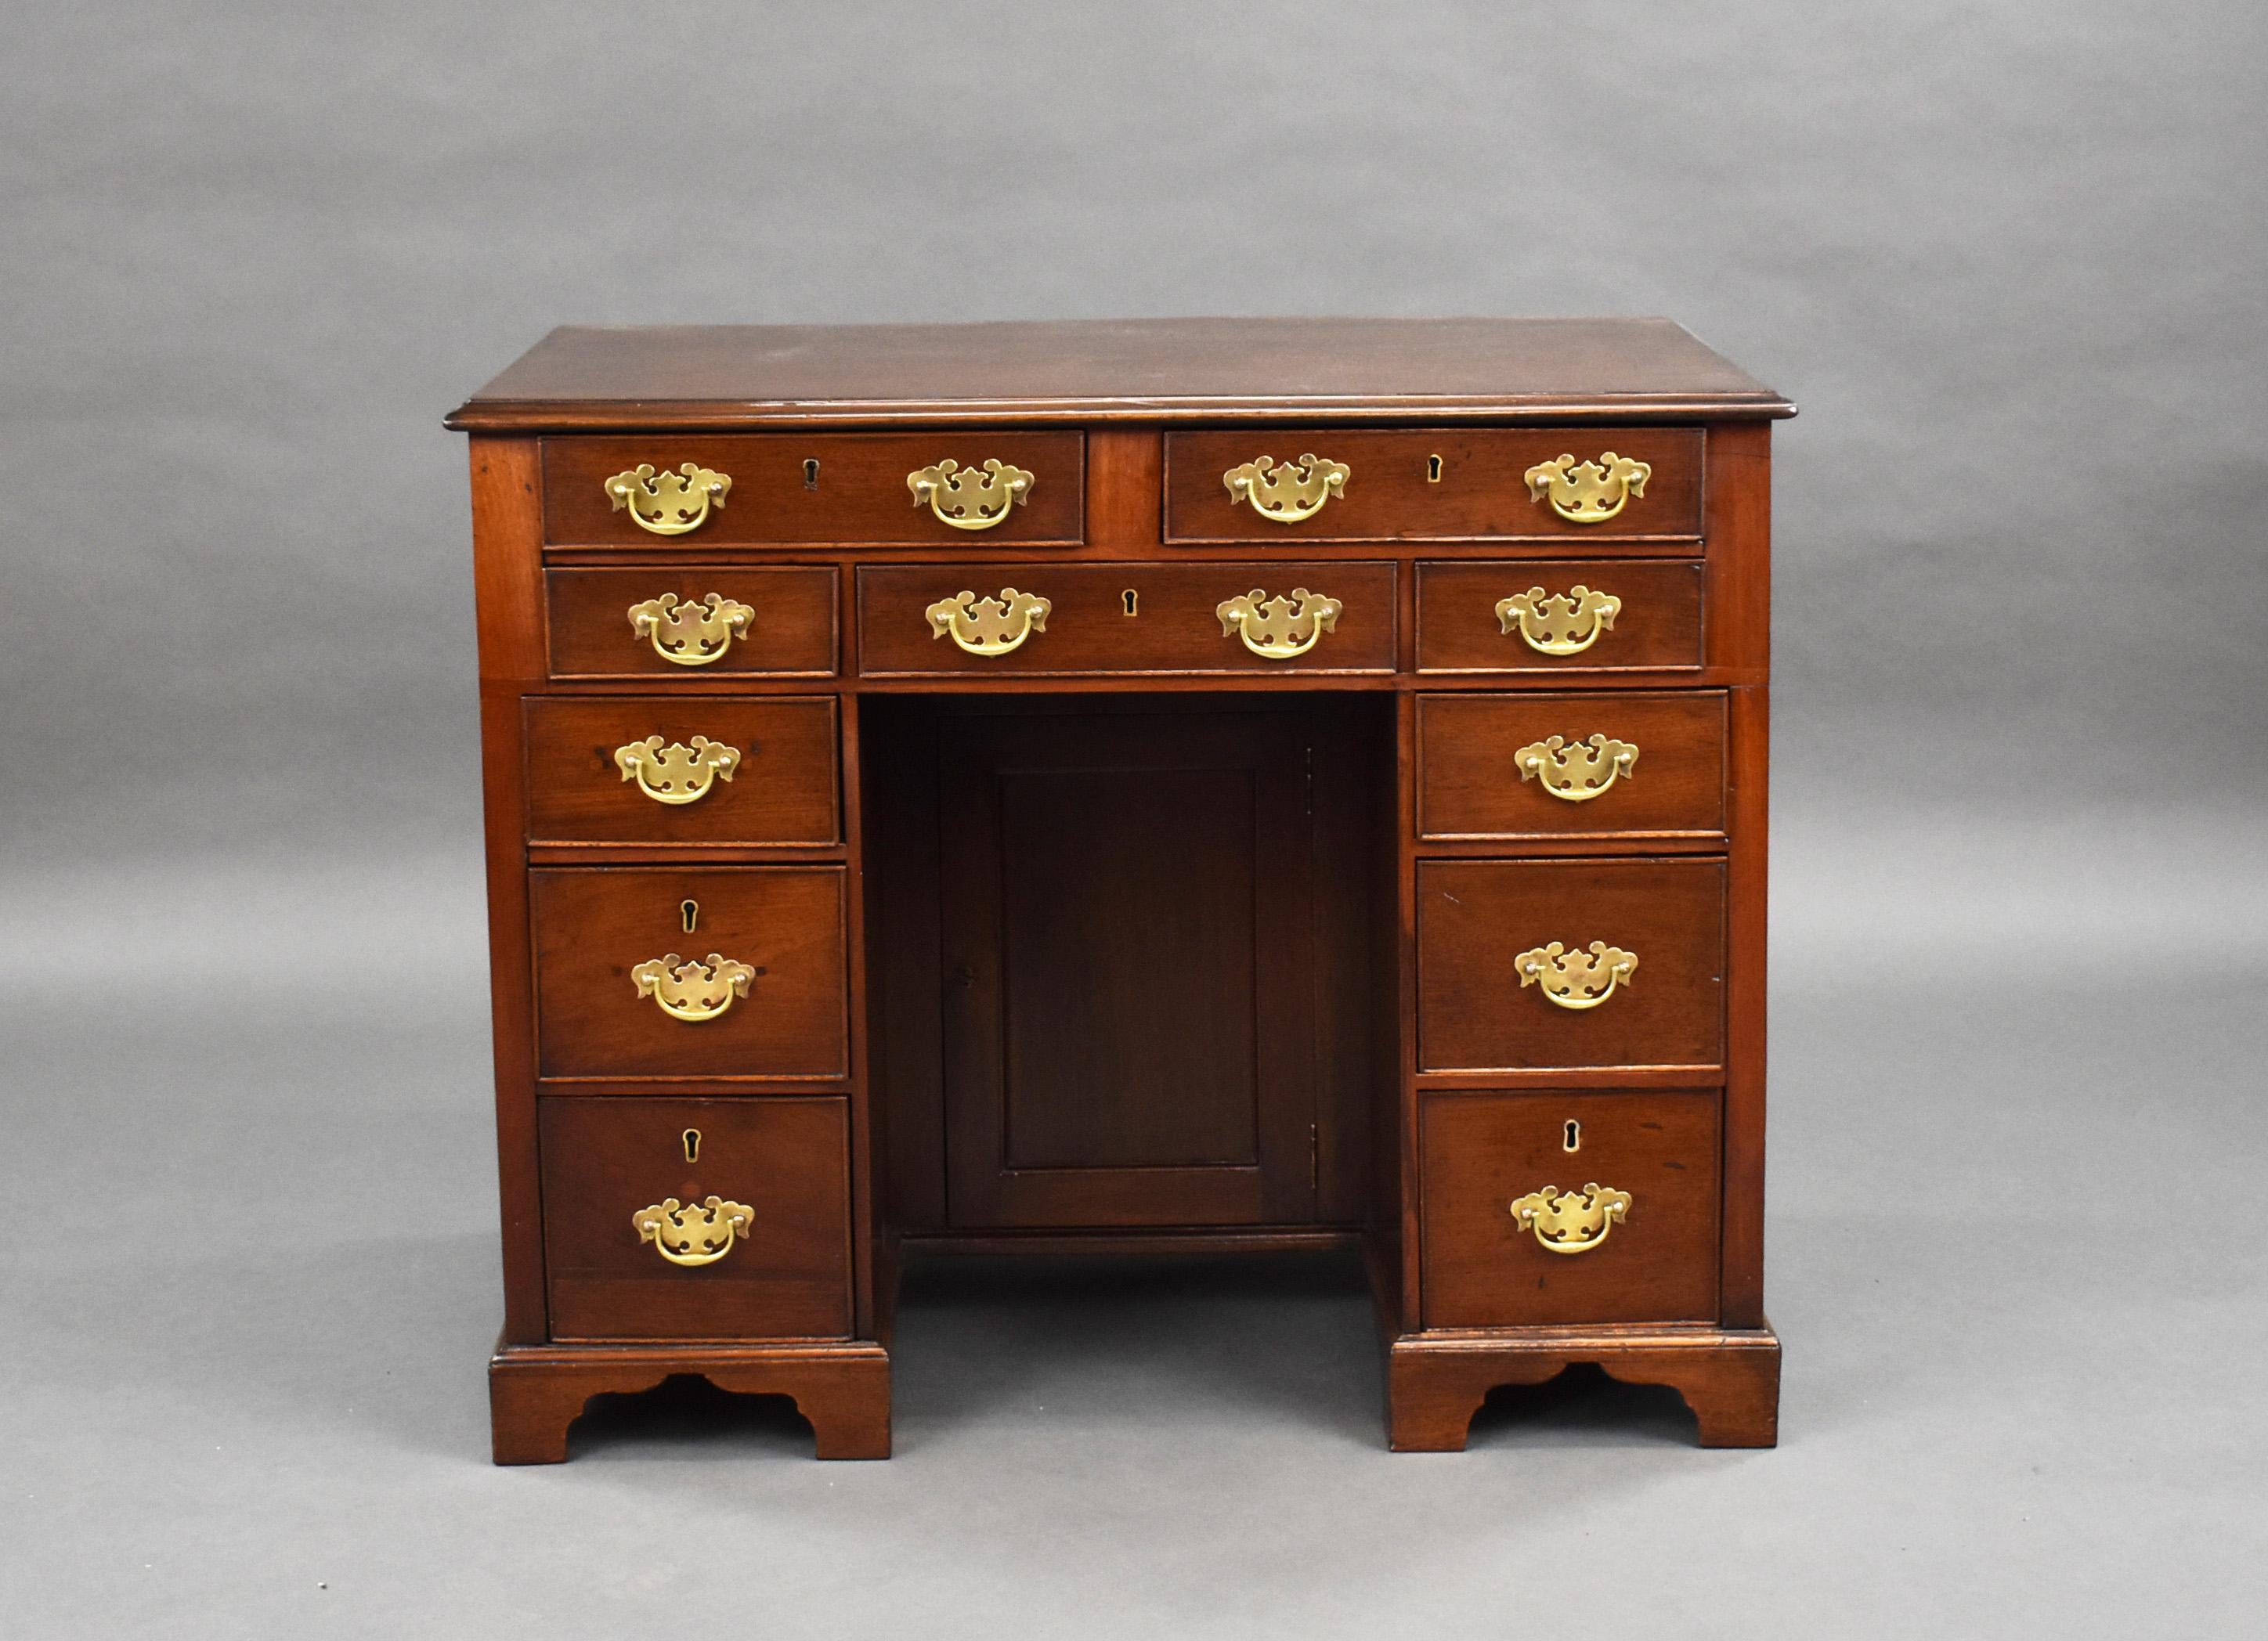 18th Century English George III Mahogany Kneehole Desk In Good Condition For Sale In Chelmsford, Essex